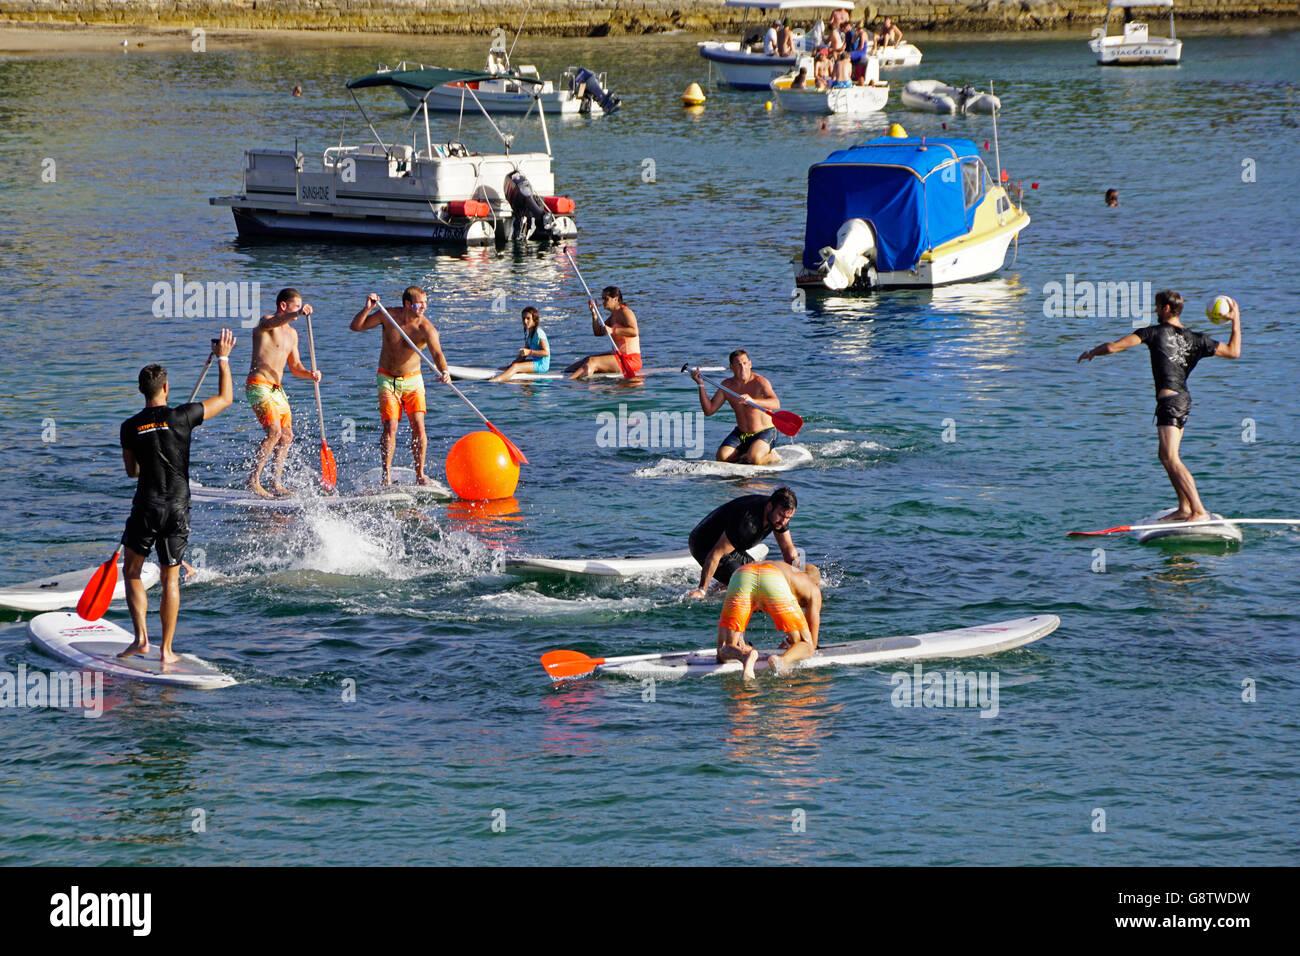 Stand up Paddle (SUP) Polo-Spiel in Manly Wharf, NSW, Australien. Stockfoto